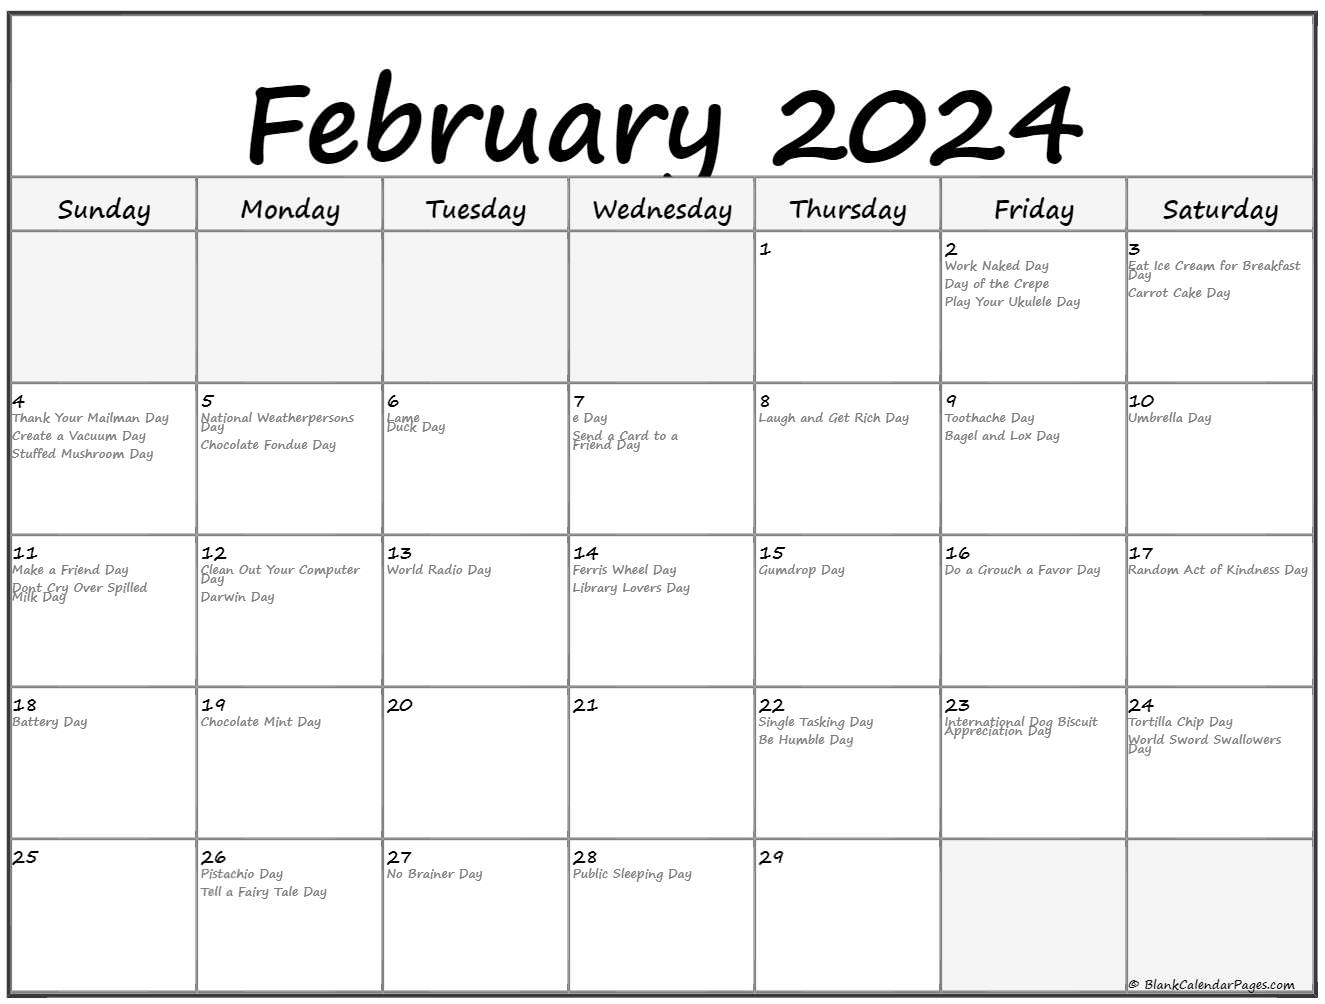 Collection of February 2020 calendars with holidays1571 x 1185